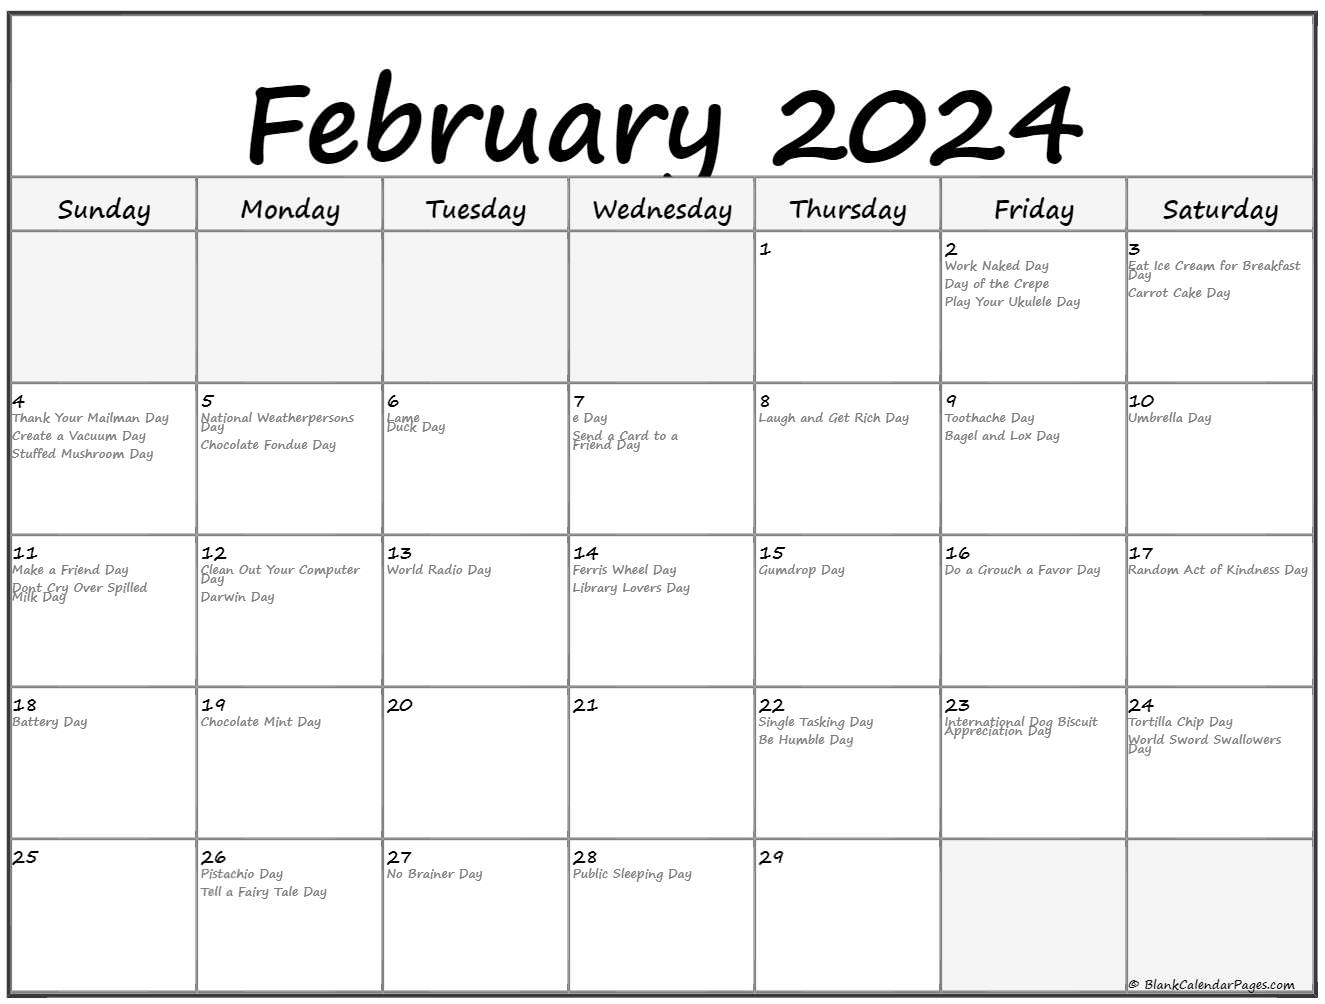 Collection of February 2020 calendars with holidays1571 x 1185